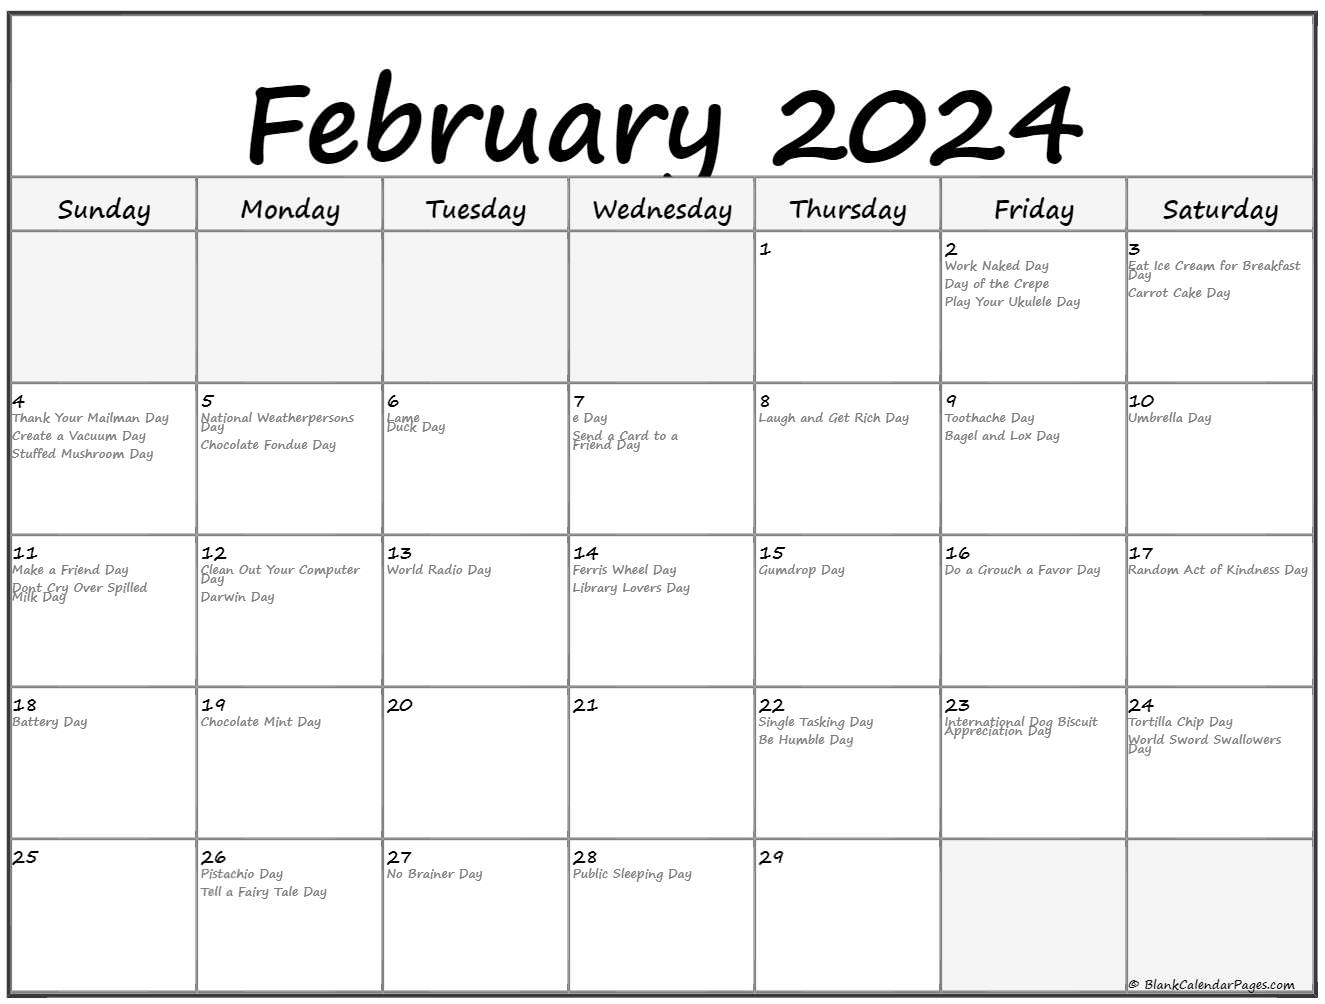 Collection of February 2020 calendars with holidays1571 x 1185